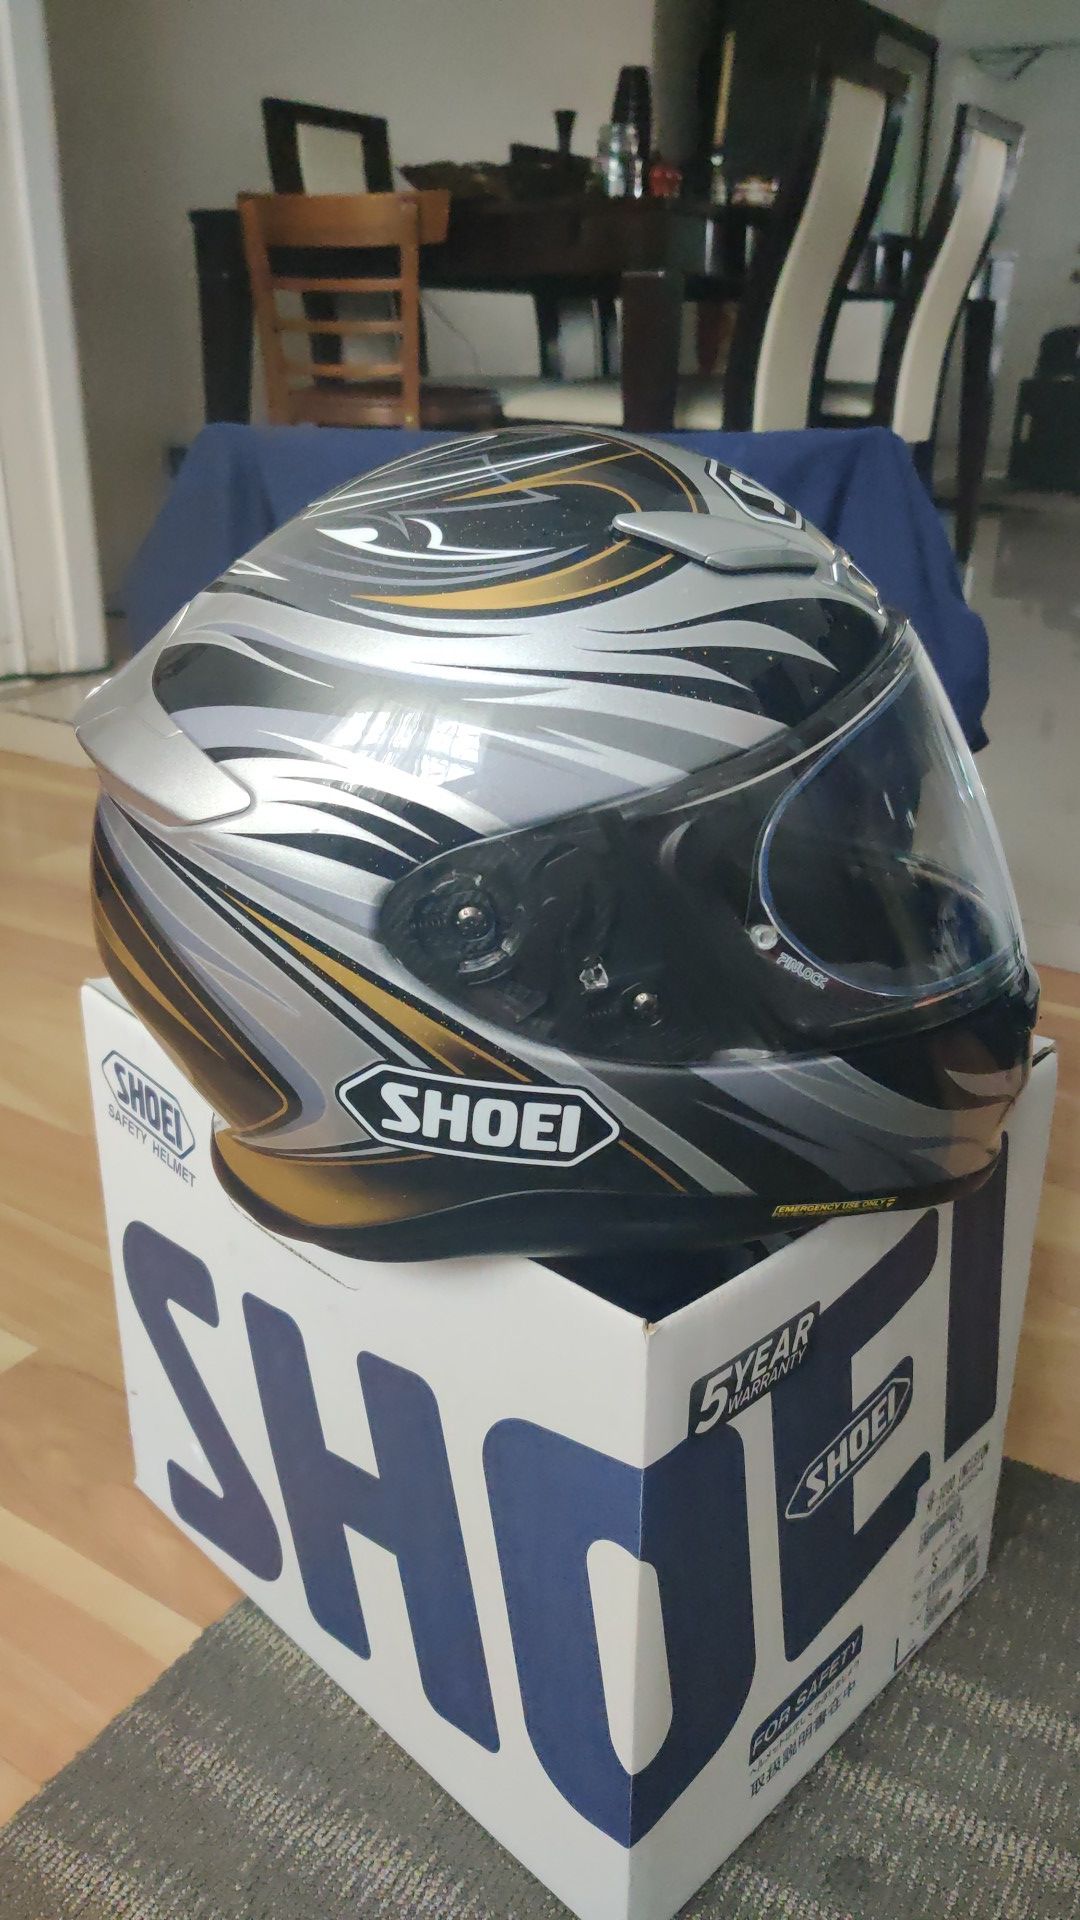 Shoei helmet size s brand new with transition visor ( gets darker with the sun and clear and night time